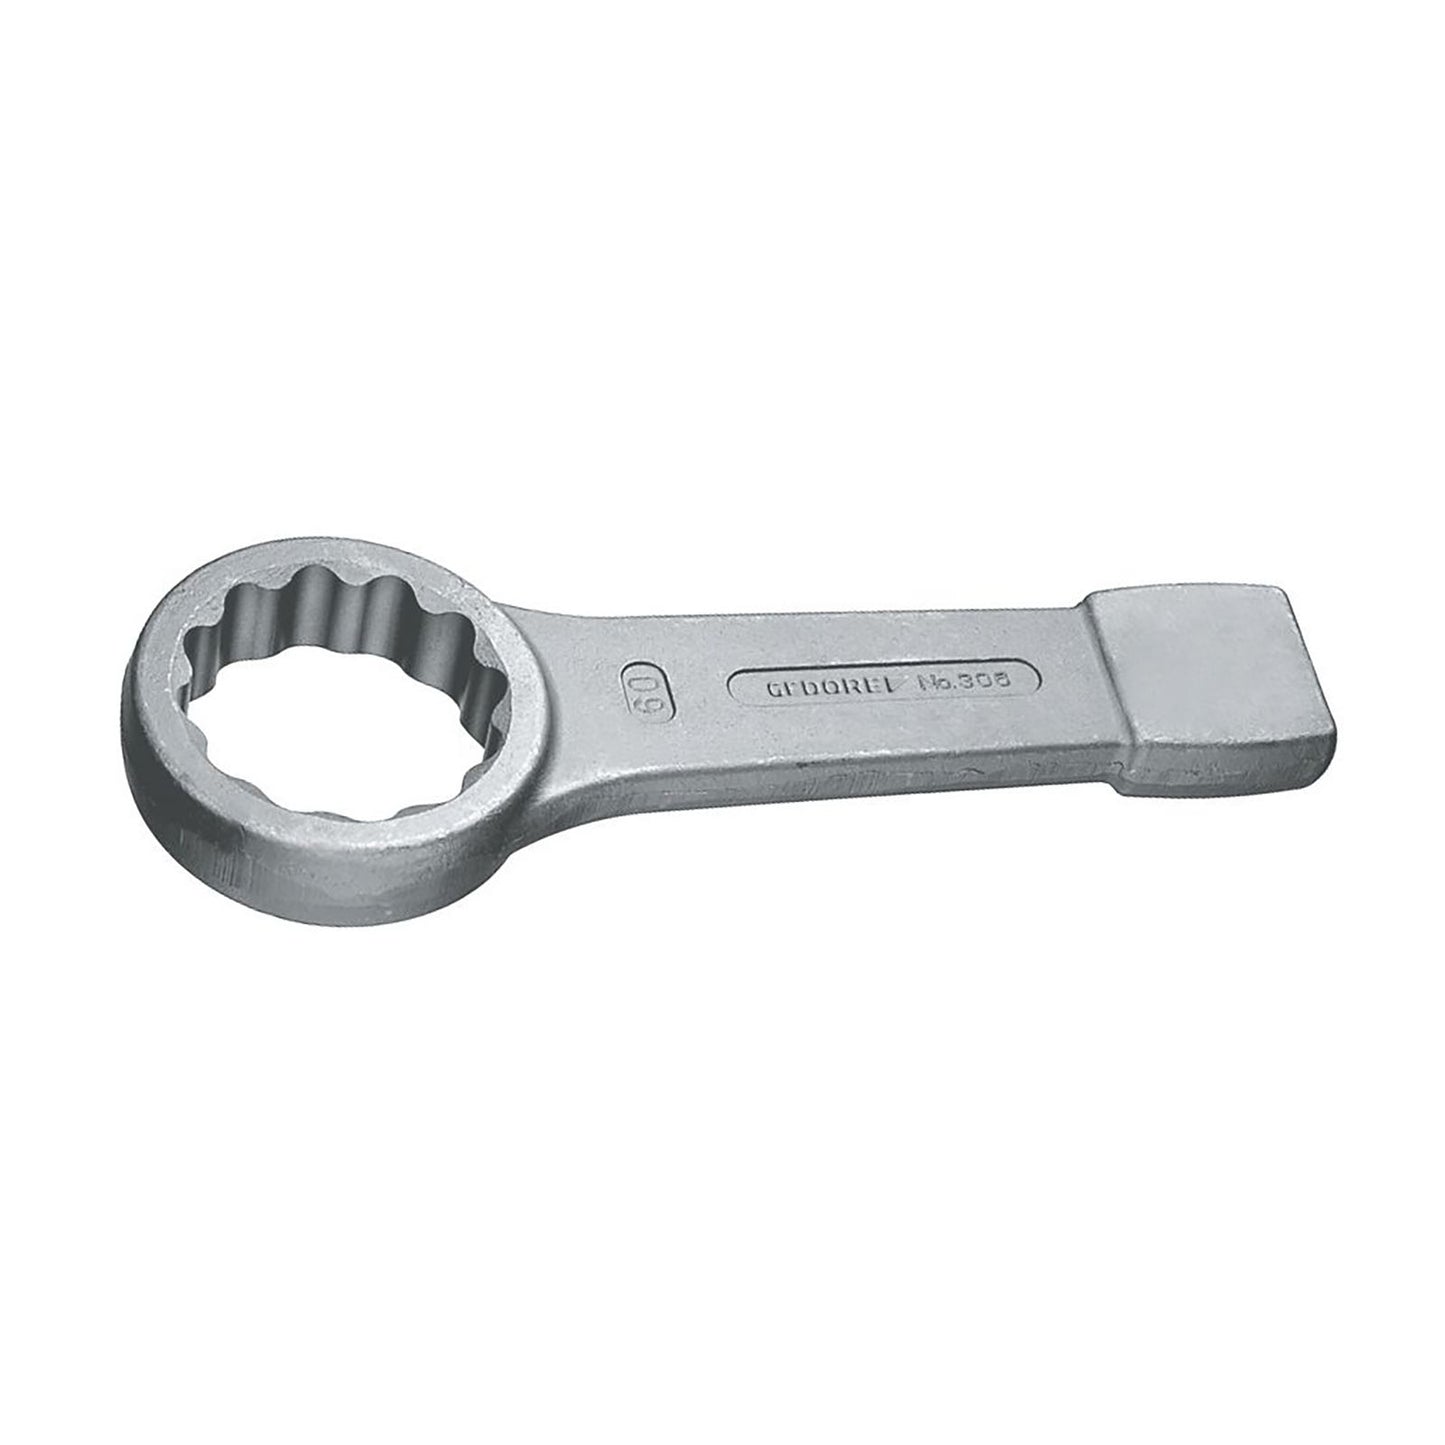 GEDORE 306 38 - Closed Strike Wrench, 38mm (6474460)